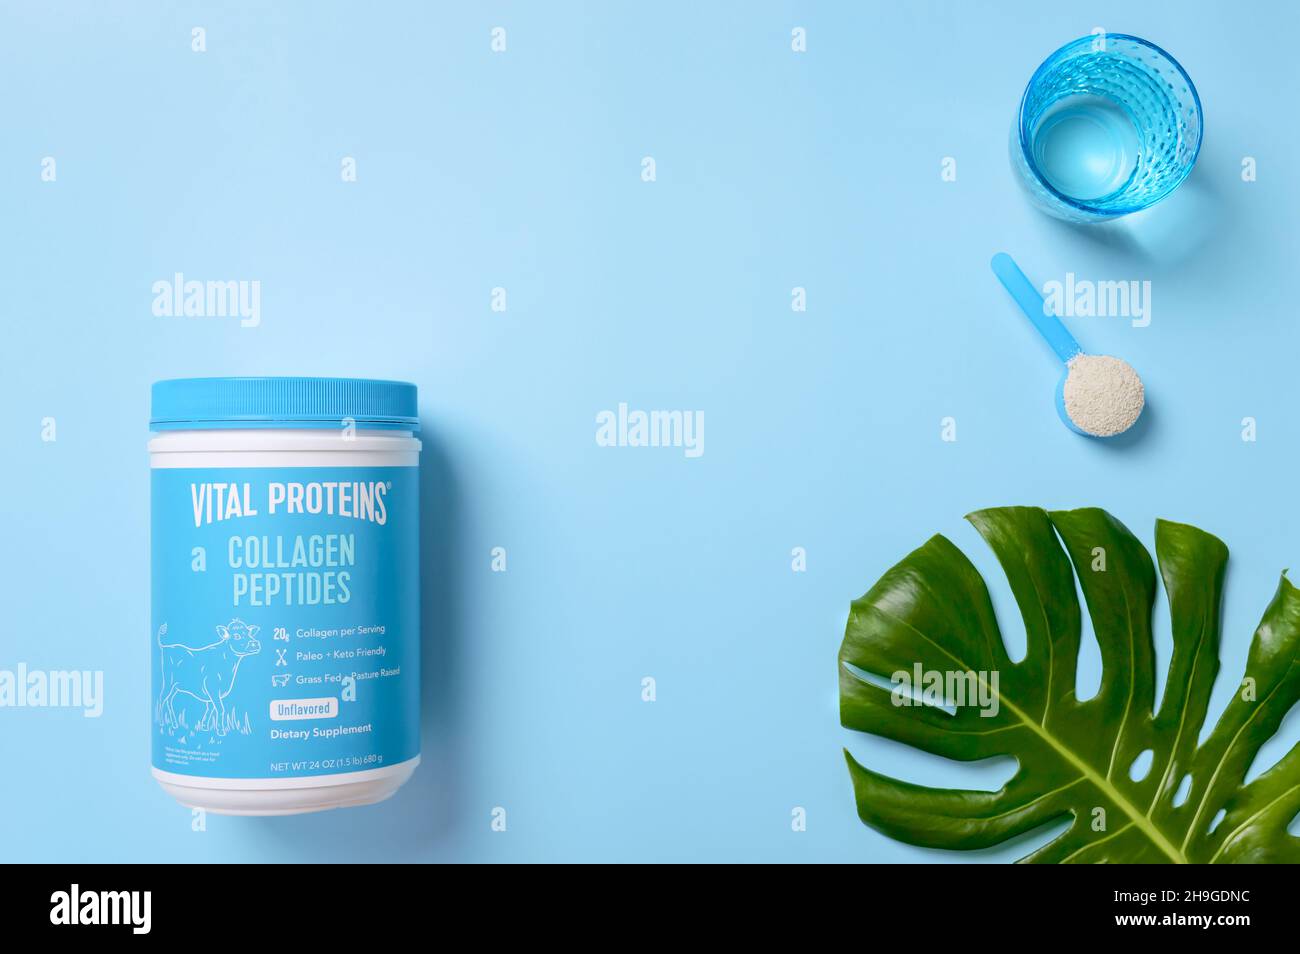 KIEV, UKRAINE-NOVEMBER 10, 2021: Collagen Peptides Powder Jar with a measuring spoon and a glass of water on a blue background, top view. Collagen fro Stock Photo